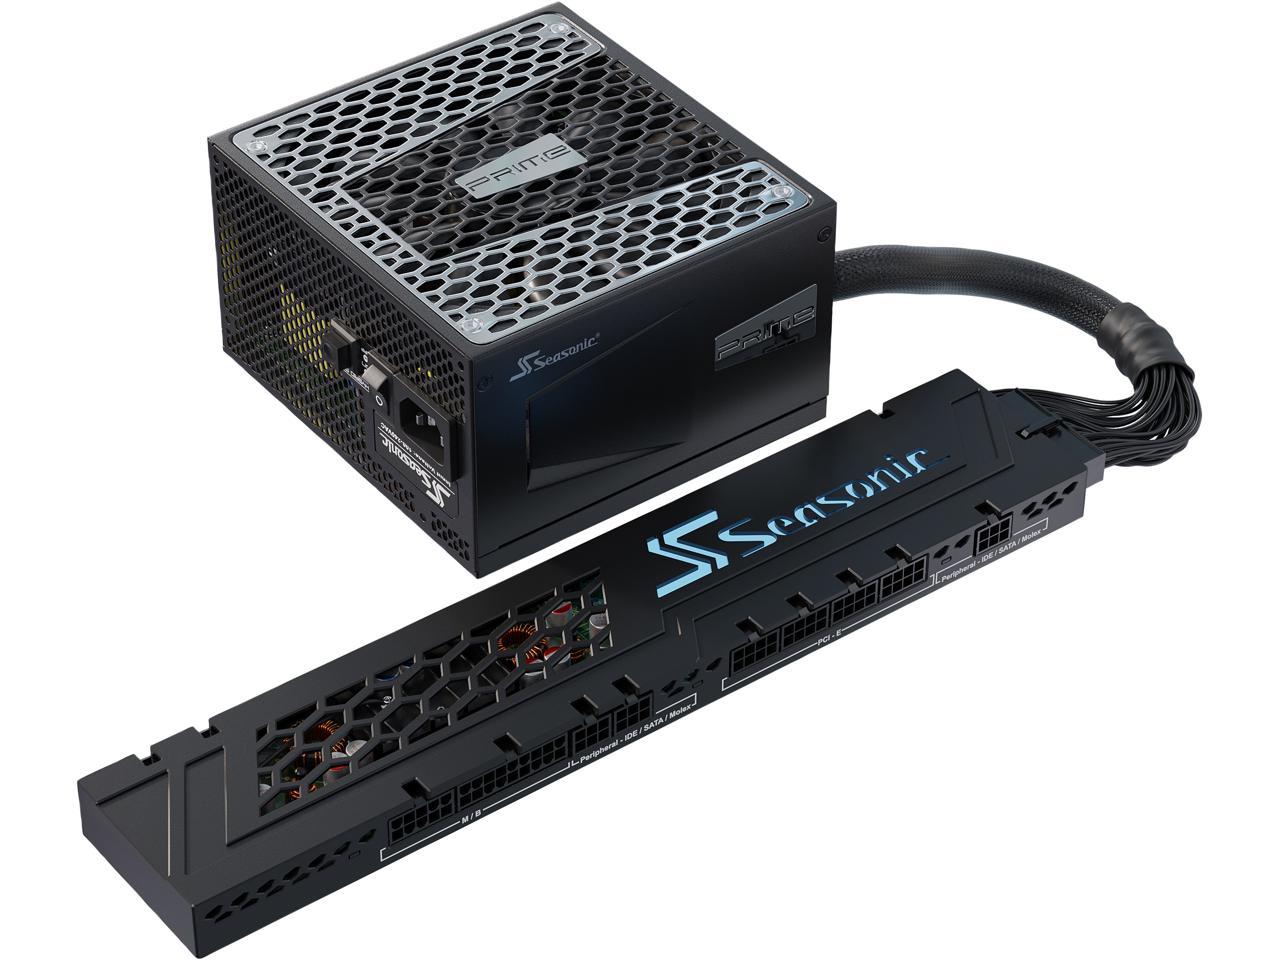 750W Seasonic CONNECT Comprise PRIME 80+ Gold Power Supply and Backplane $72AR